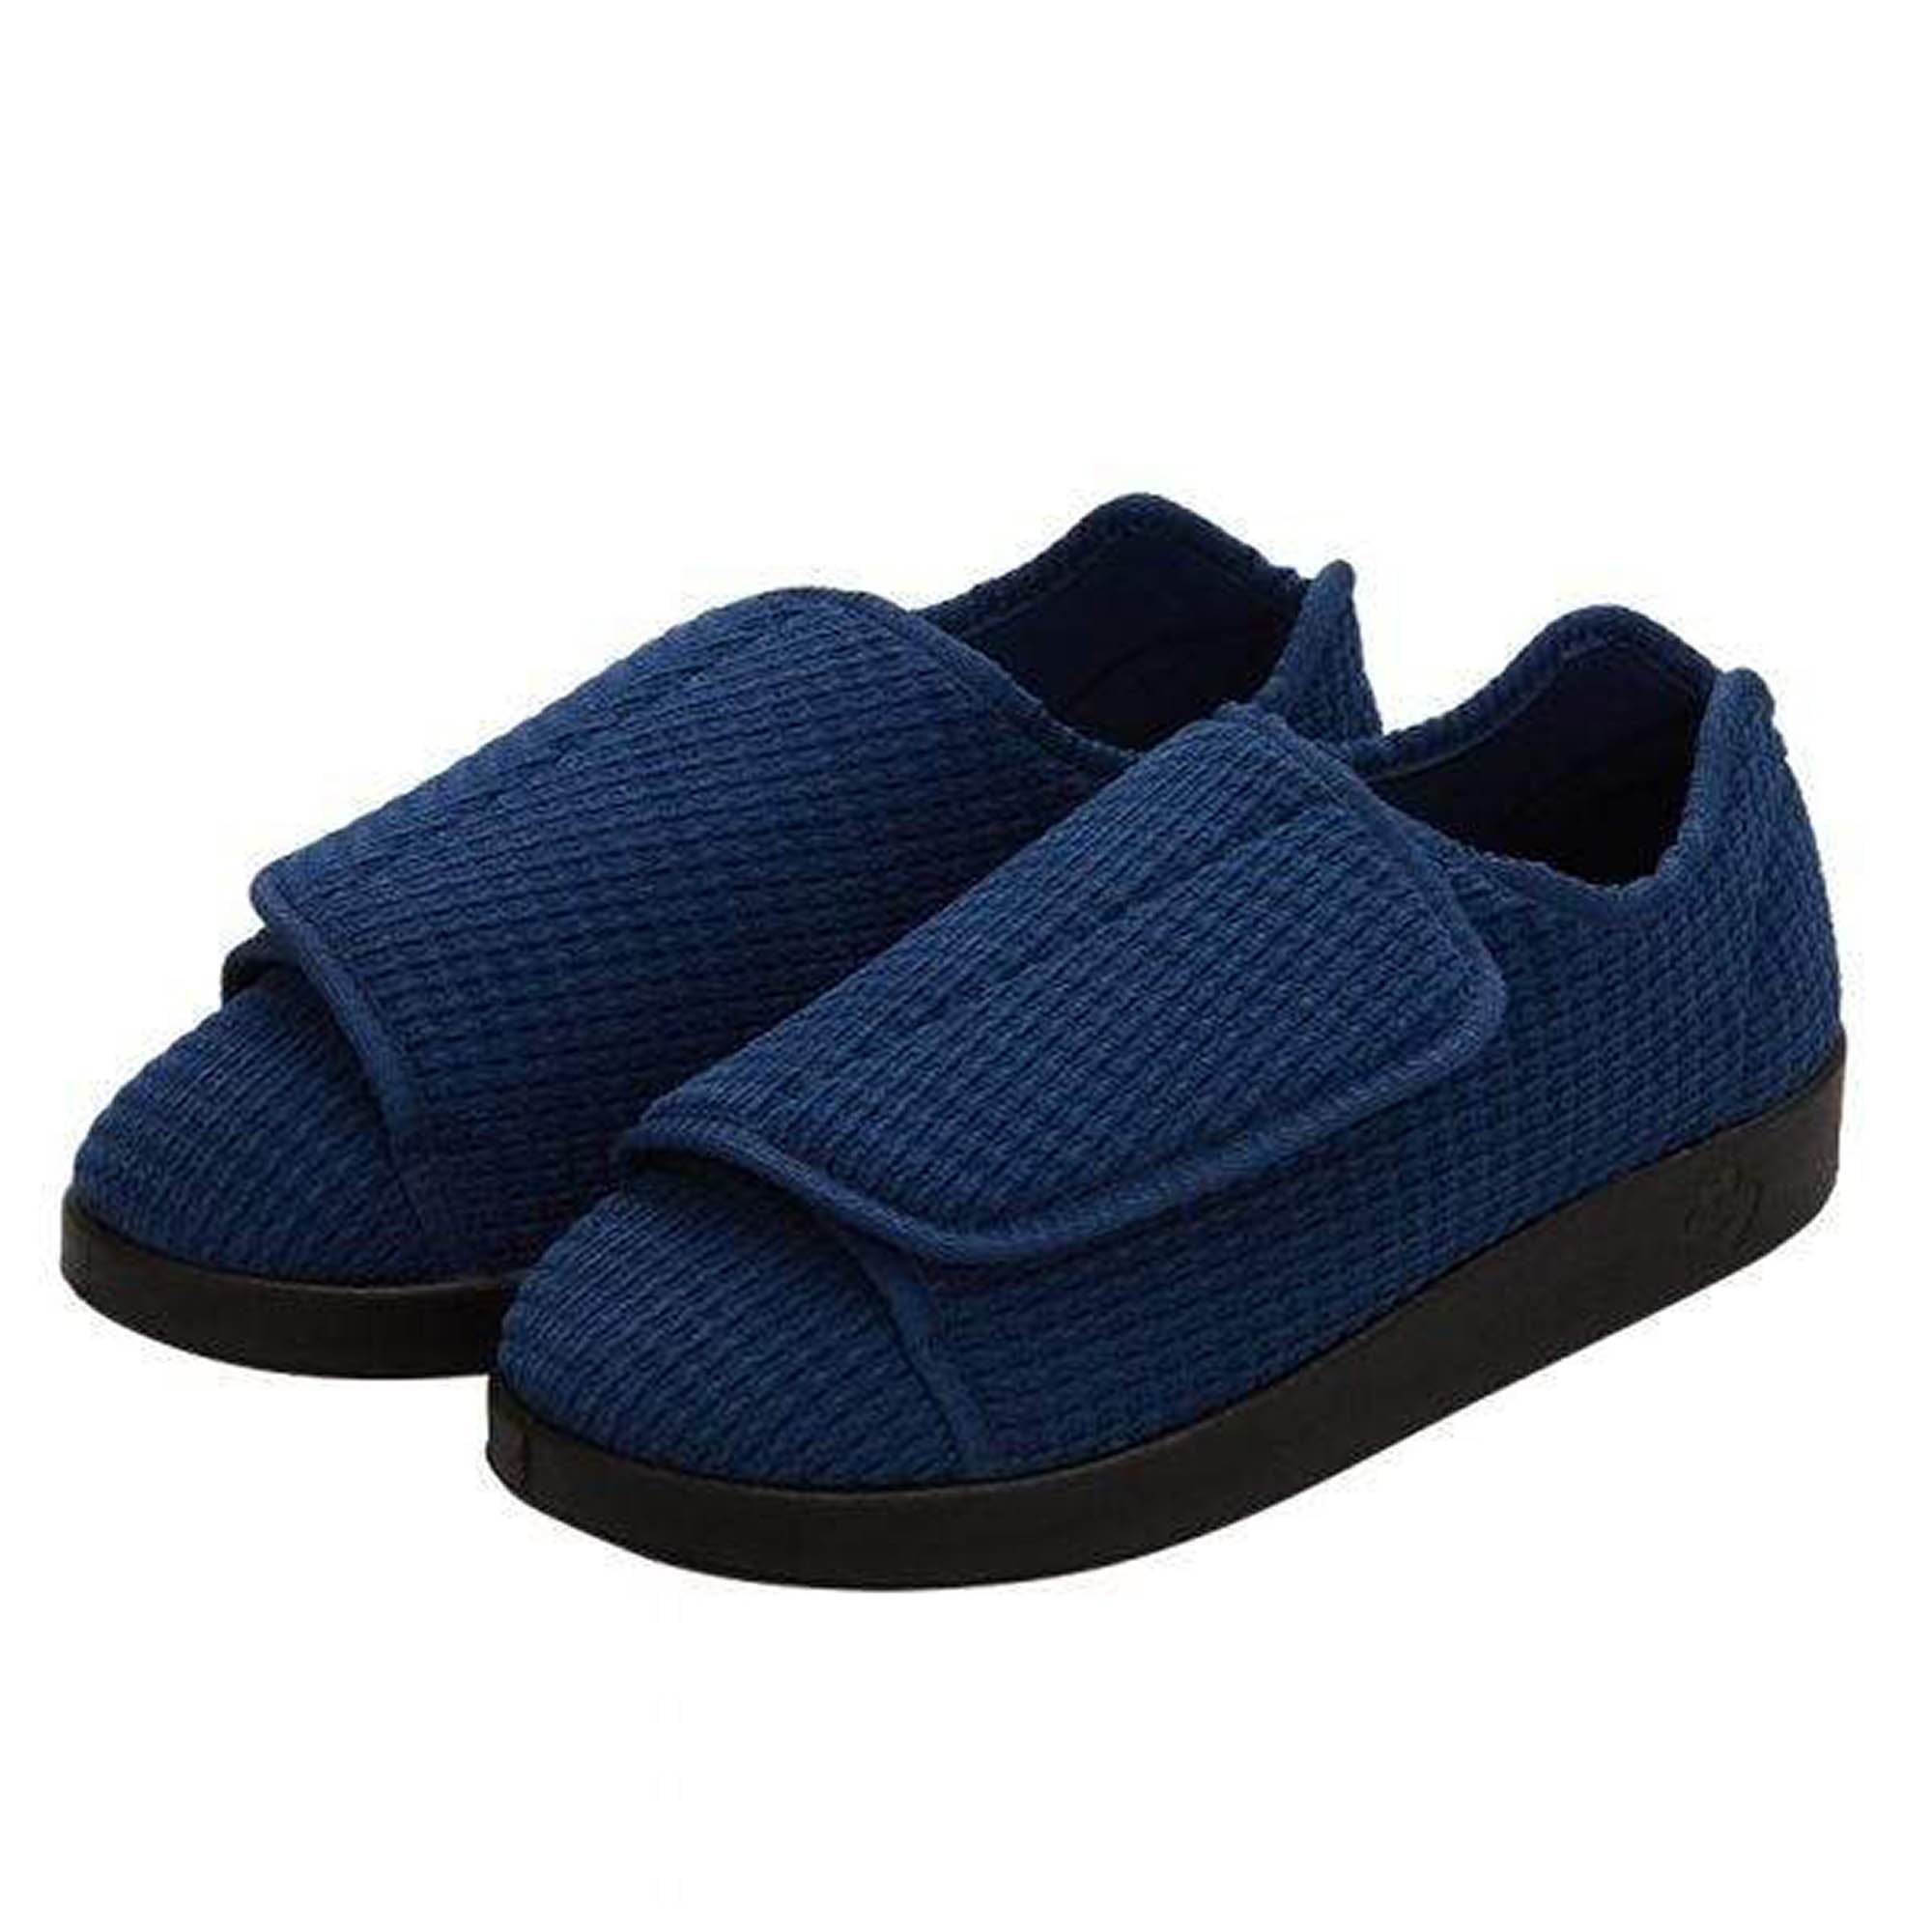 Silverts Men's Extra Extra Wide Slip-Resistant Slippers - Navy - 7